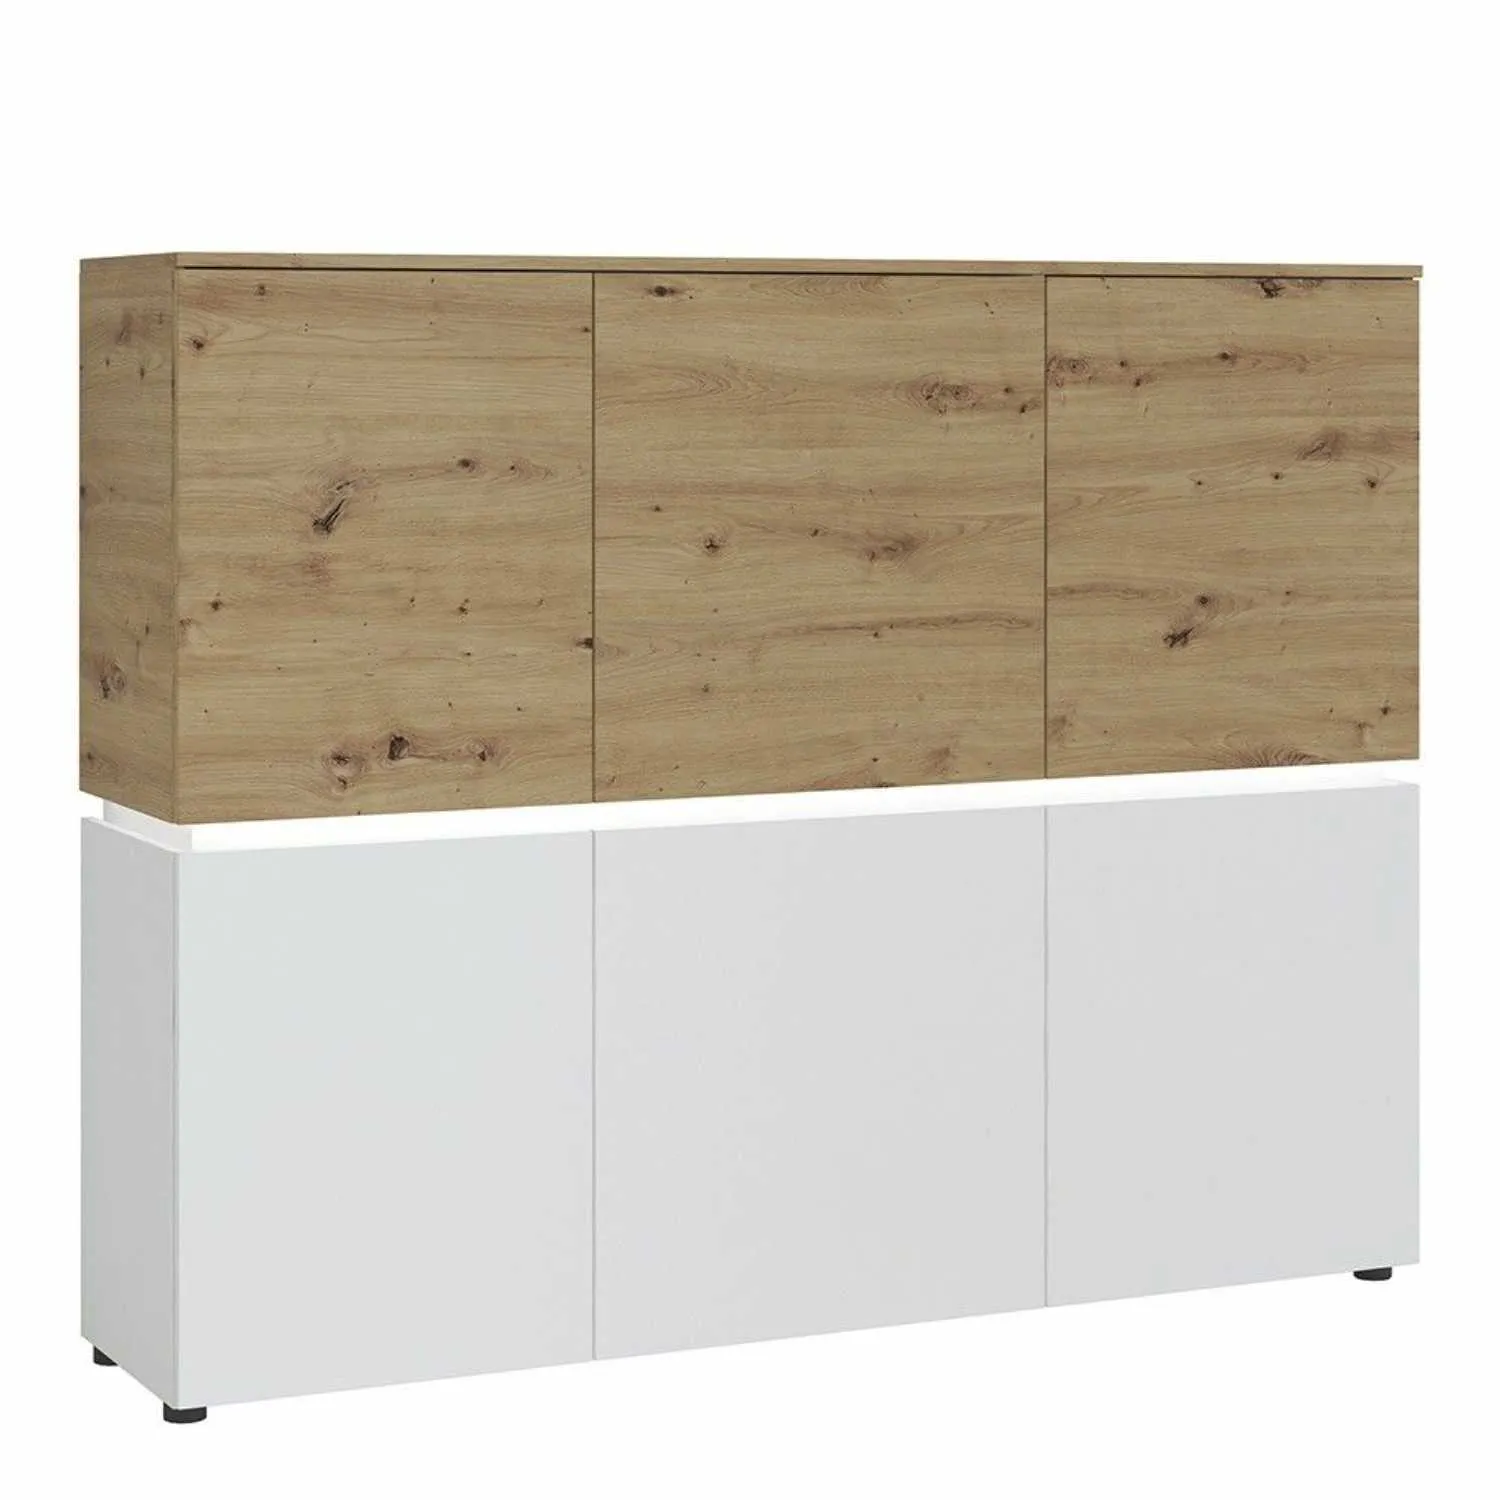 Luci 6 door cabinet in White and Oak